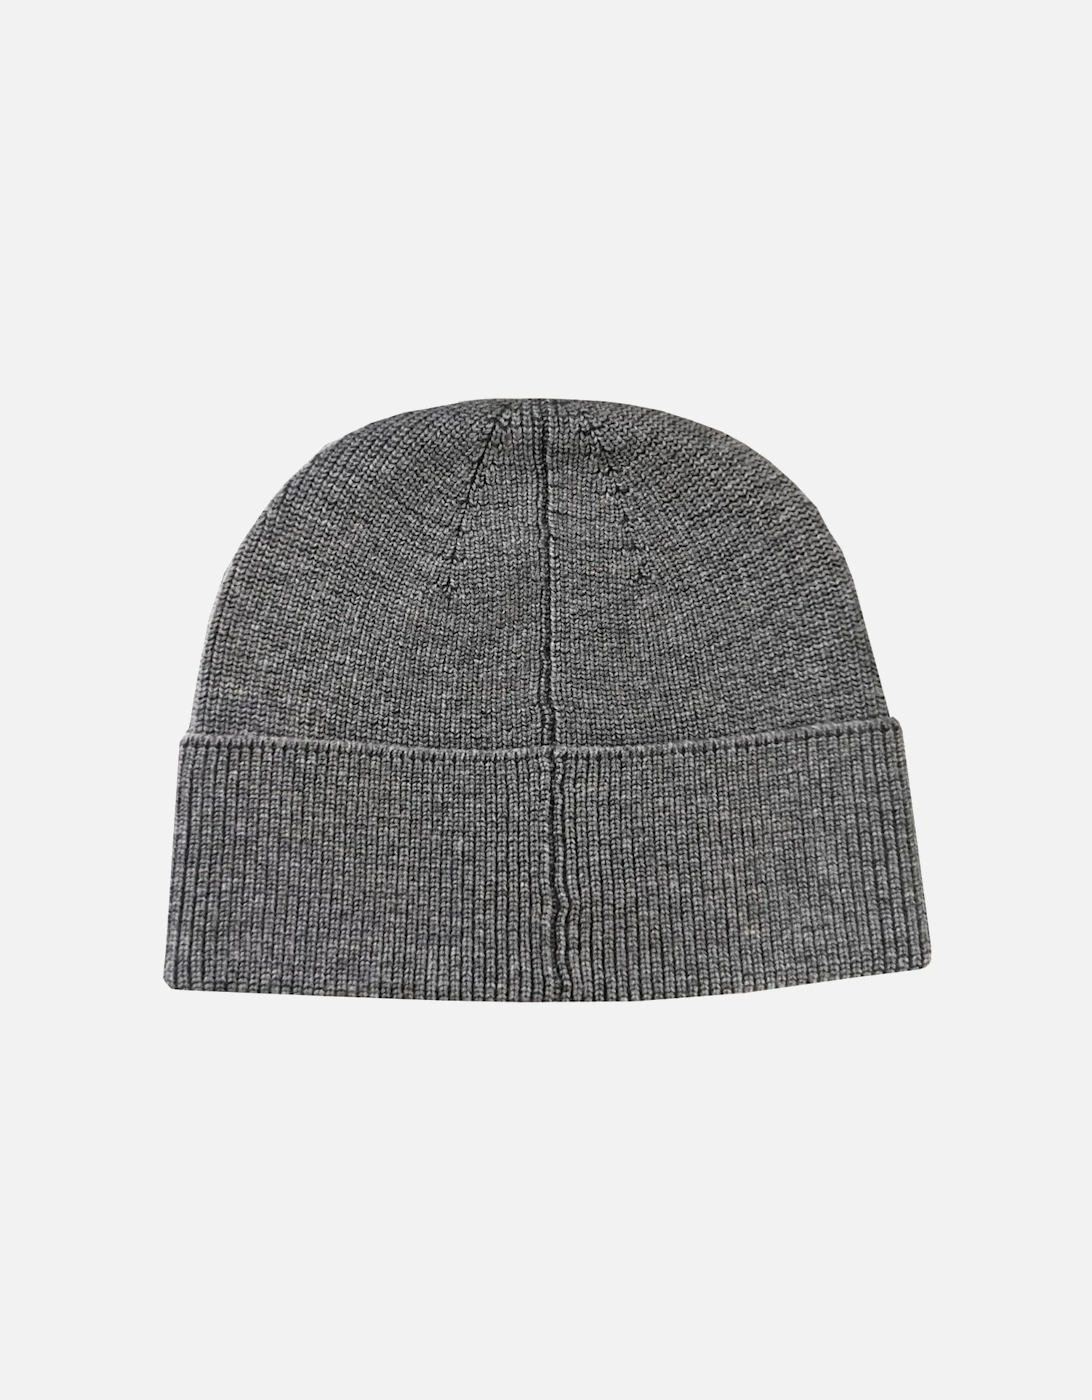 Men's Silver Knitted Lamichetto Hat.